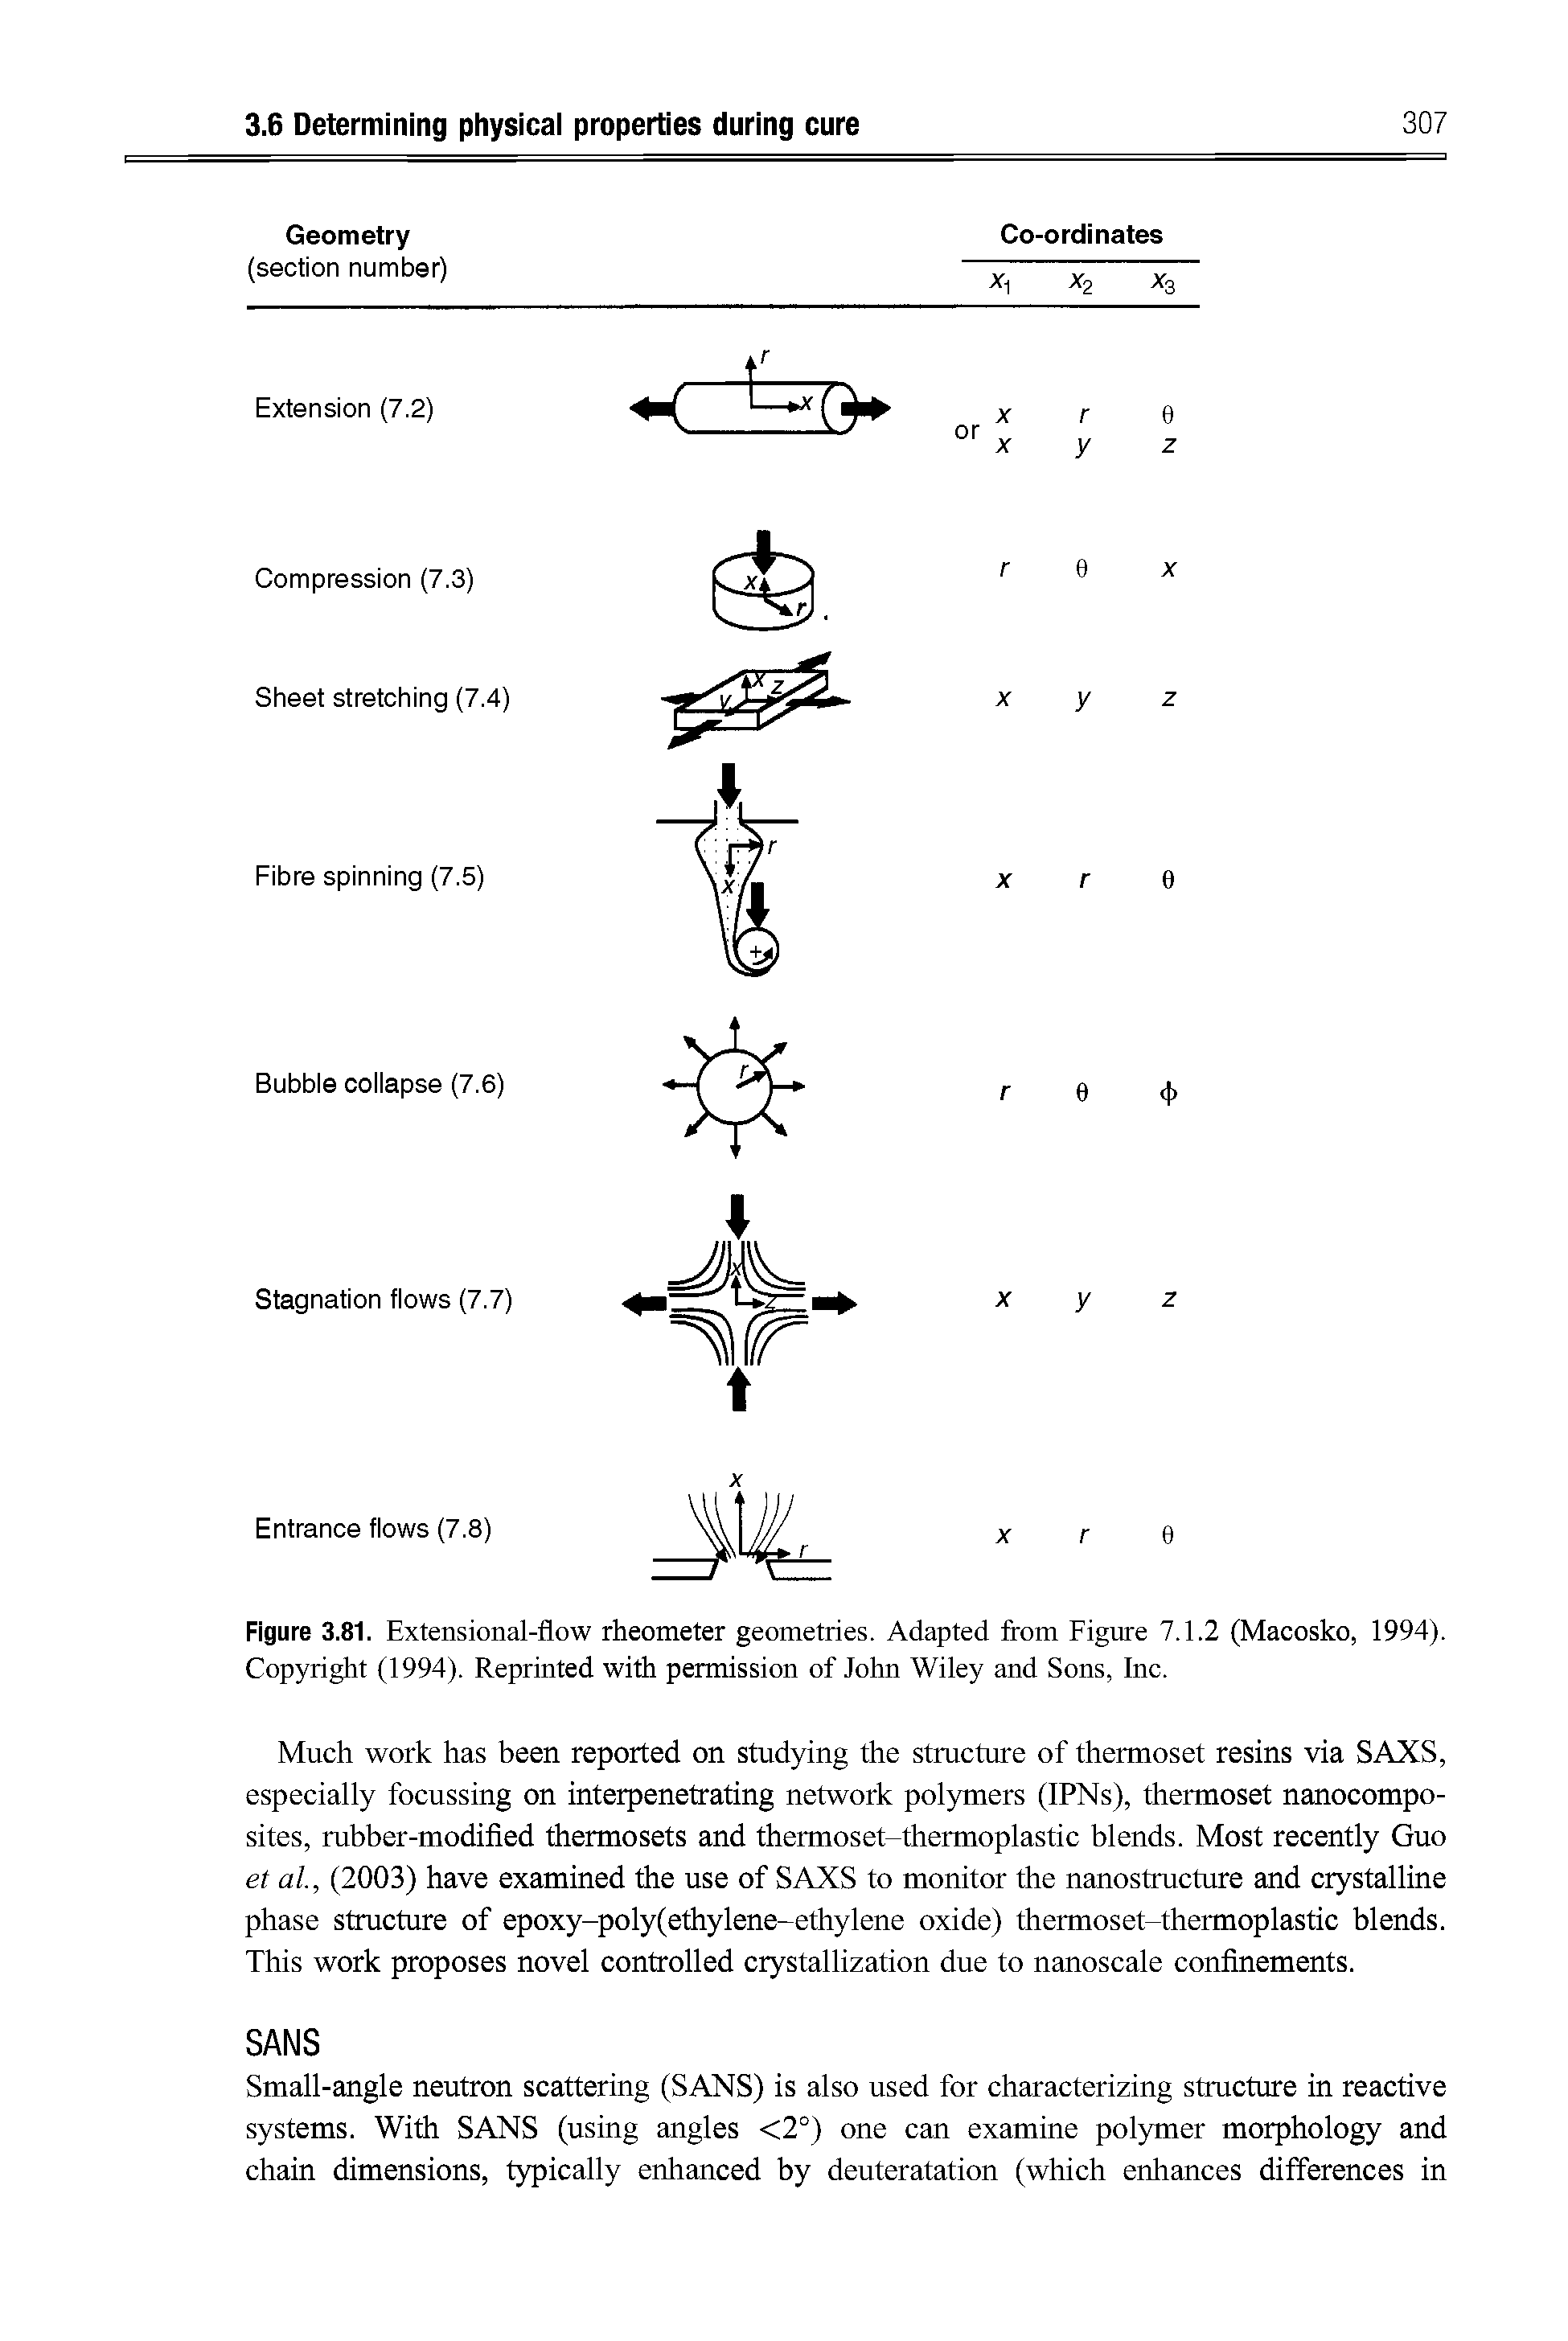 Figure 3.81. Extensional-flow rheometer geometries. Adapted from Figure 7.1.2 (Macosko, 1994). Copyright (1994). Reprinted with permission of John Wiley and Sons, Inc.